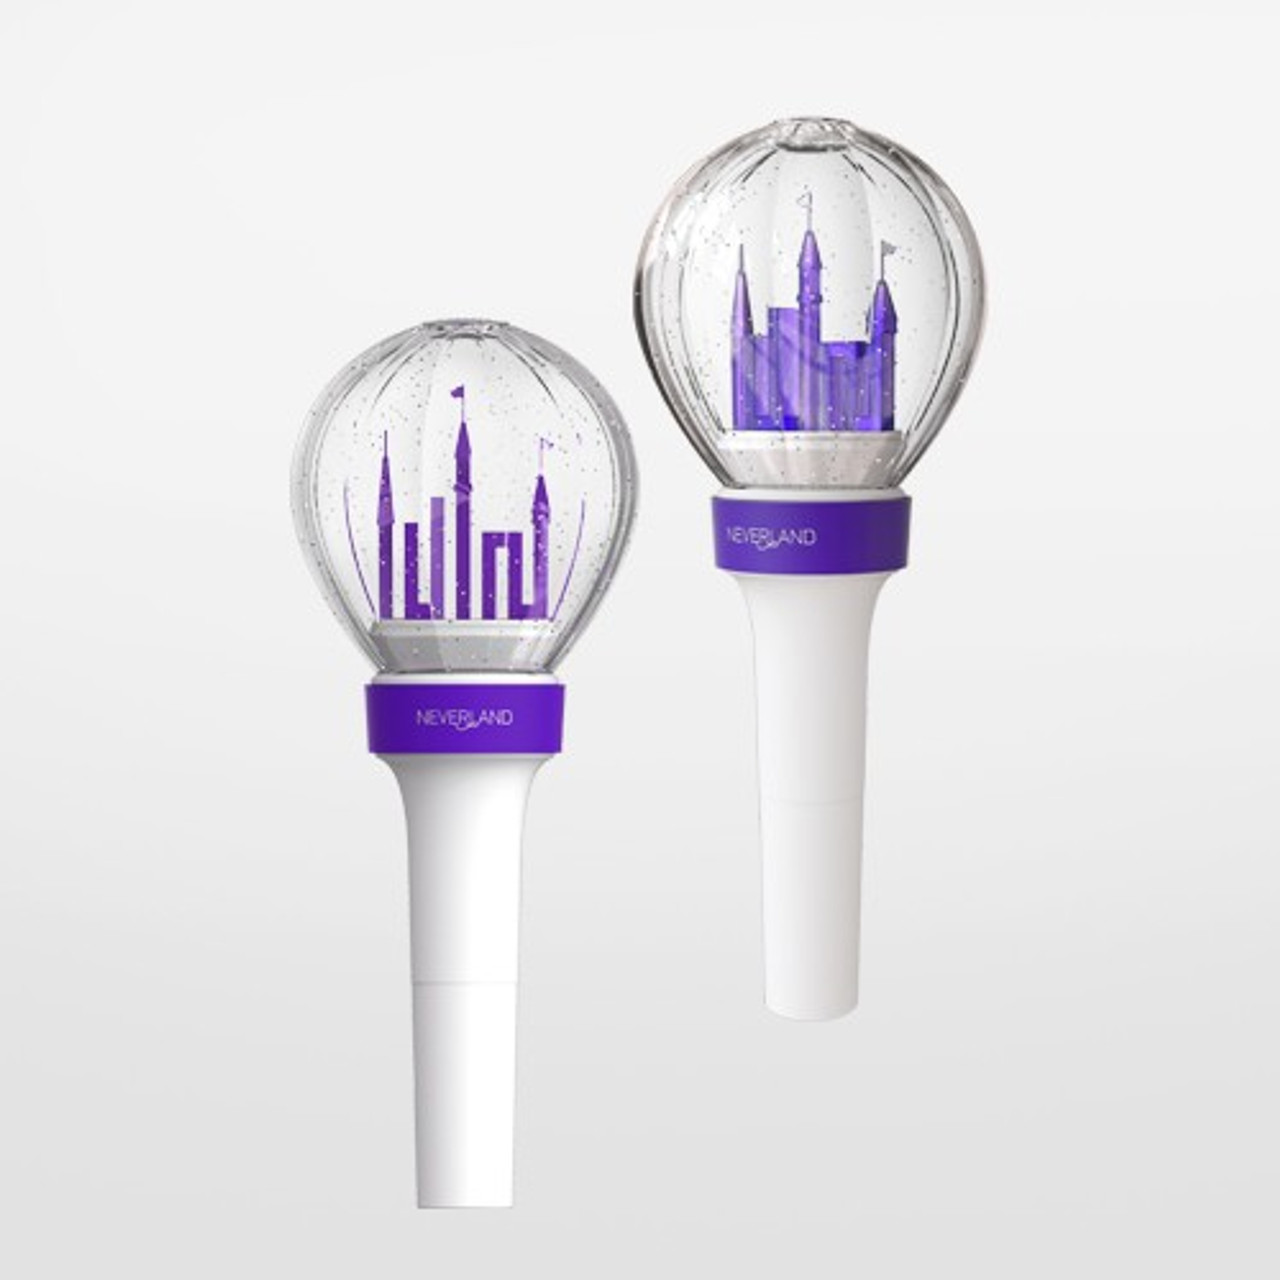 Itzy Lightstick Name - itzy 2020